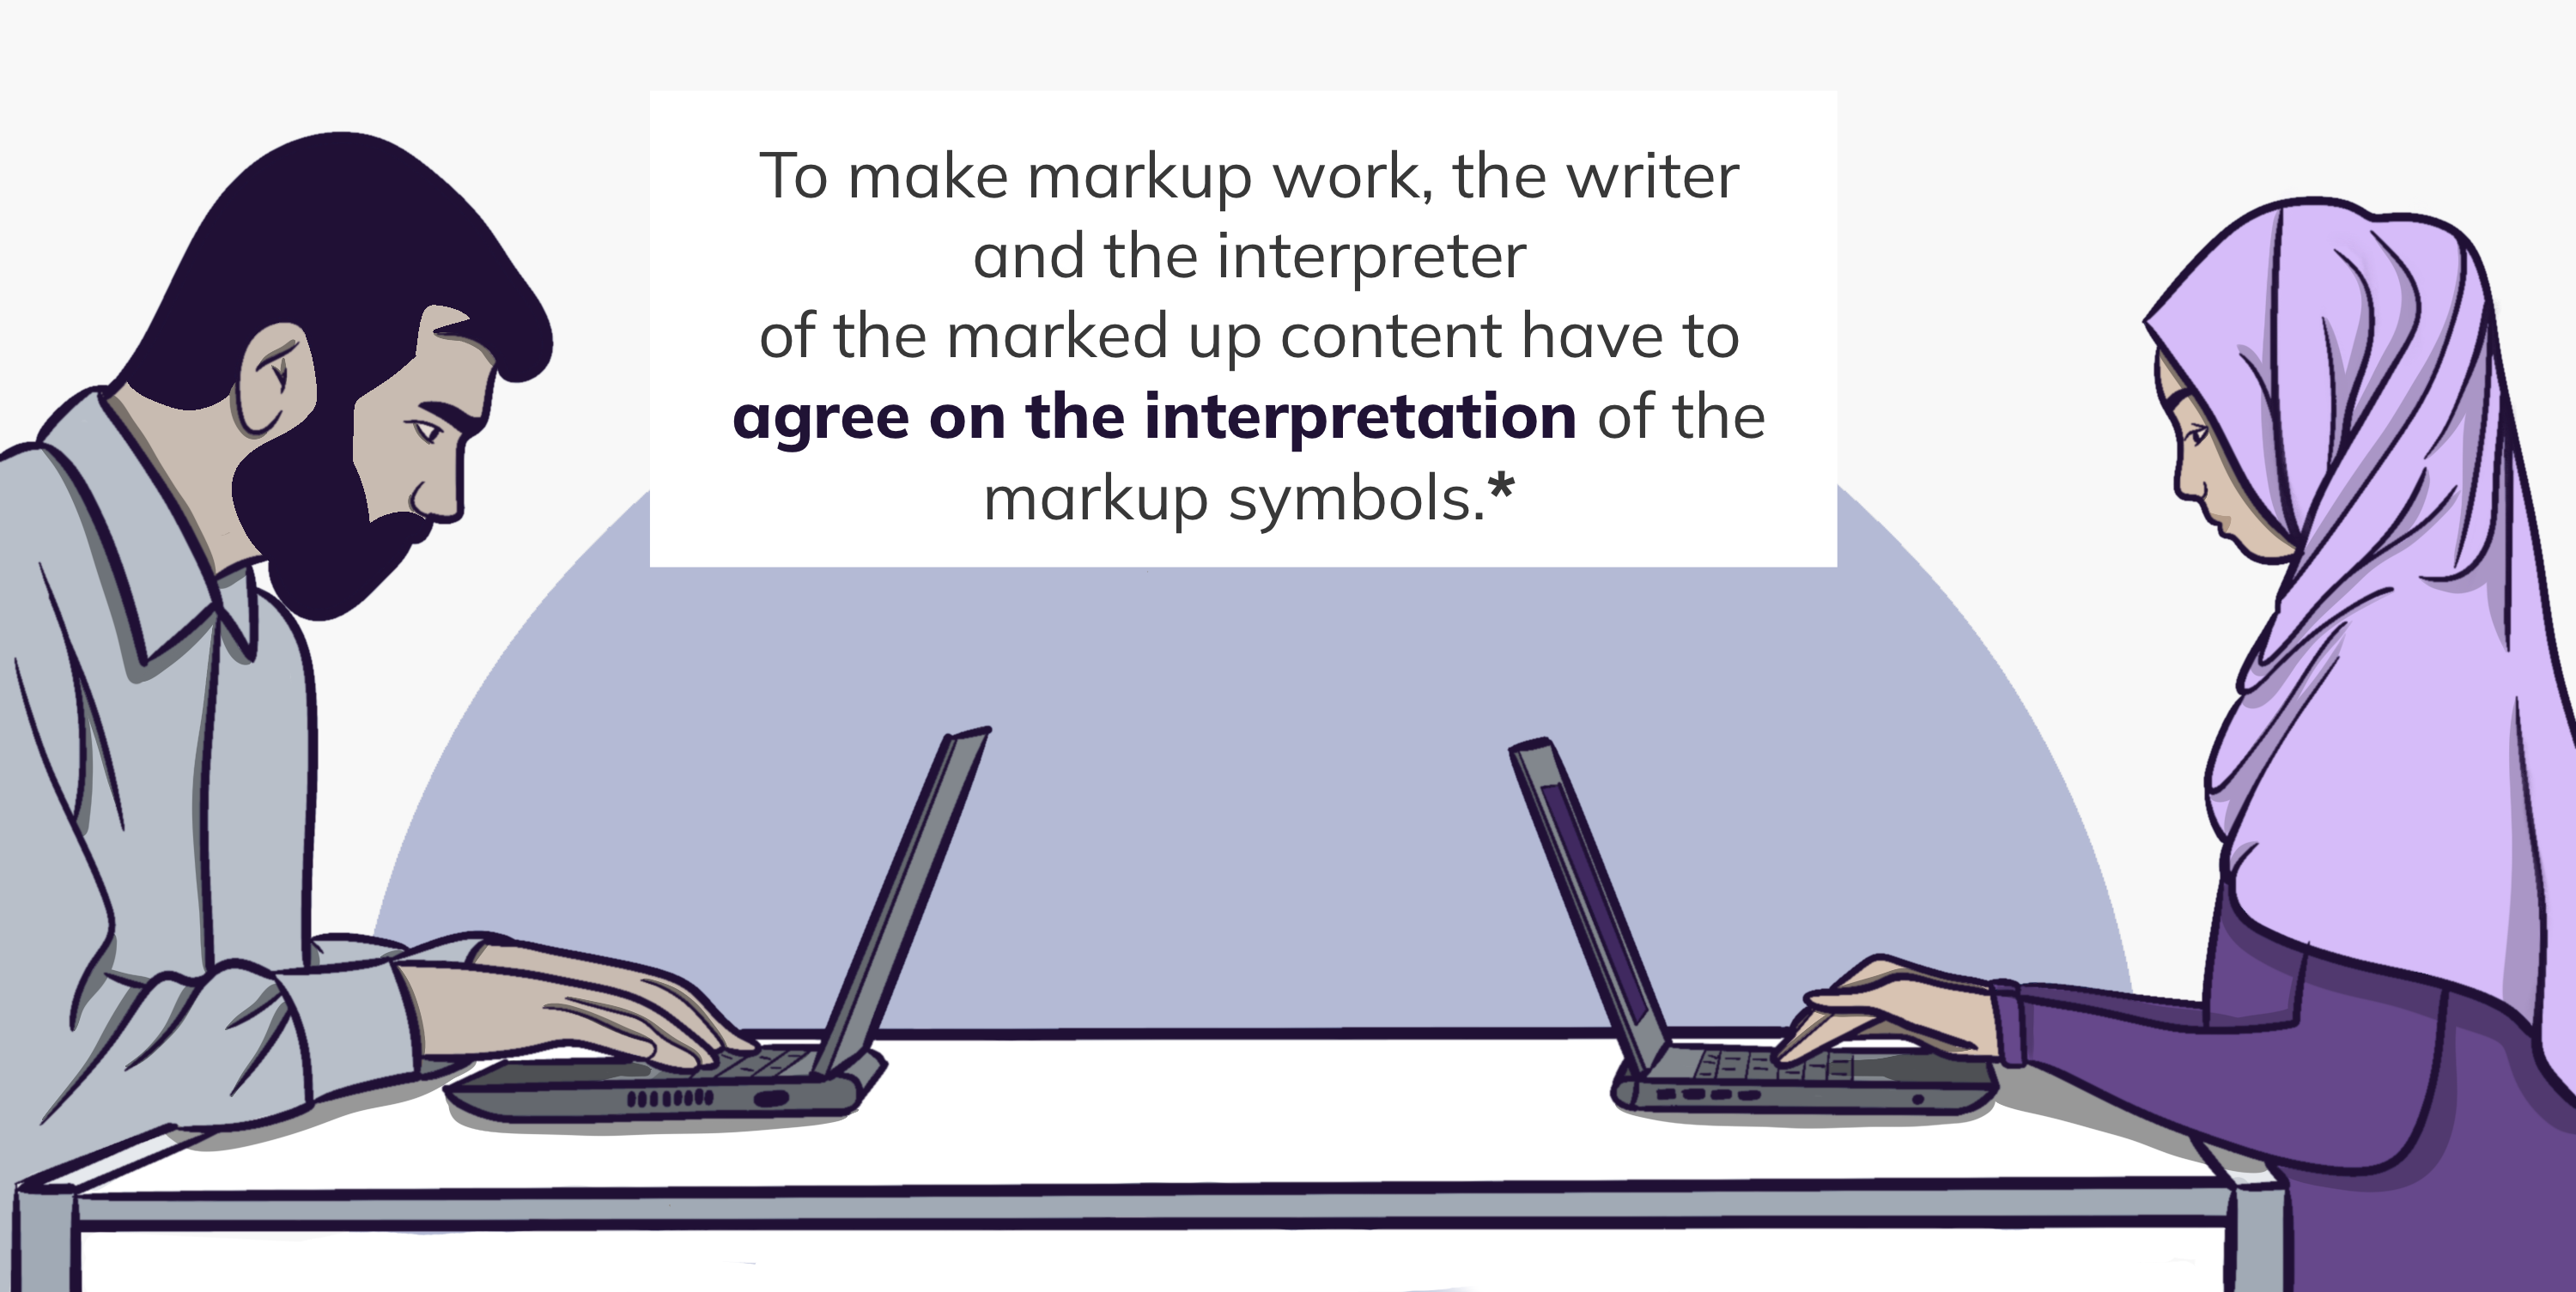 Quote by Cynthia Zender, SAS Institue, saying 'To make markup work, the writer and the interpreter of the marked up content have to agree on the interpretation of the markup symbols.'